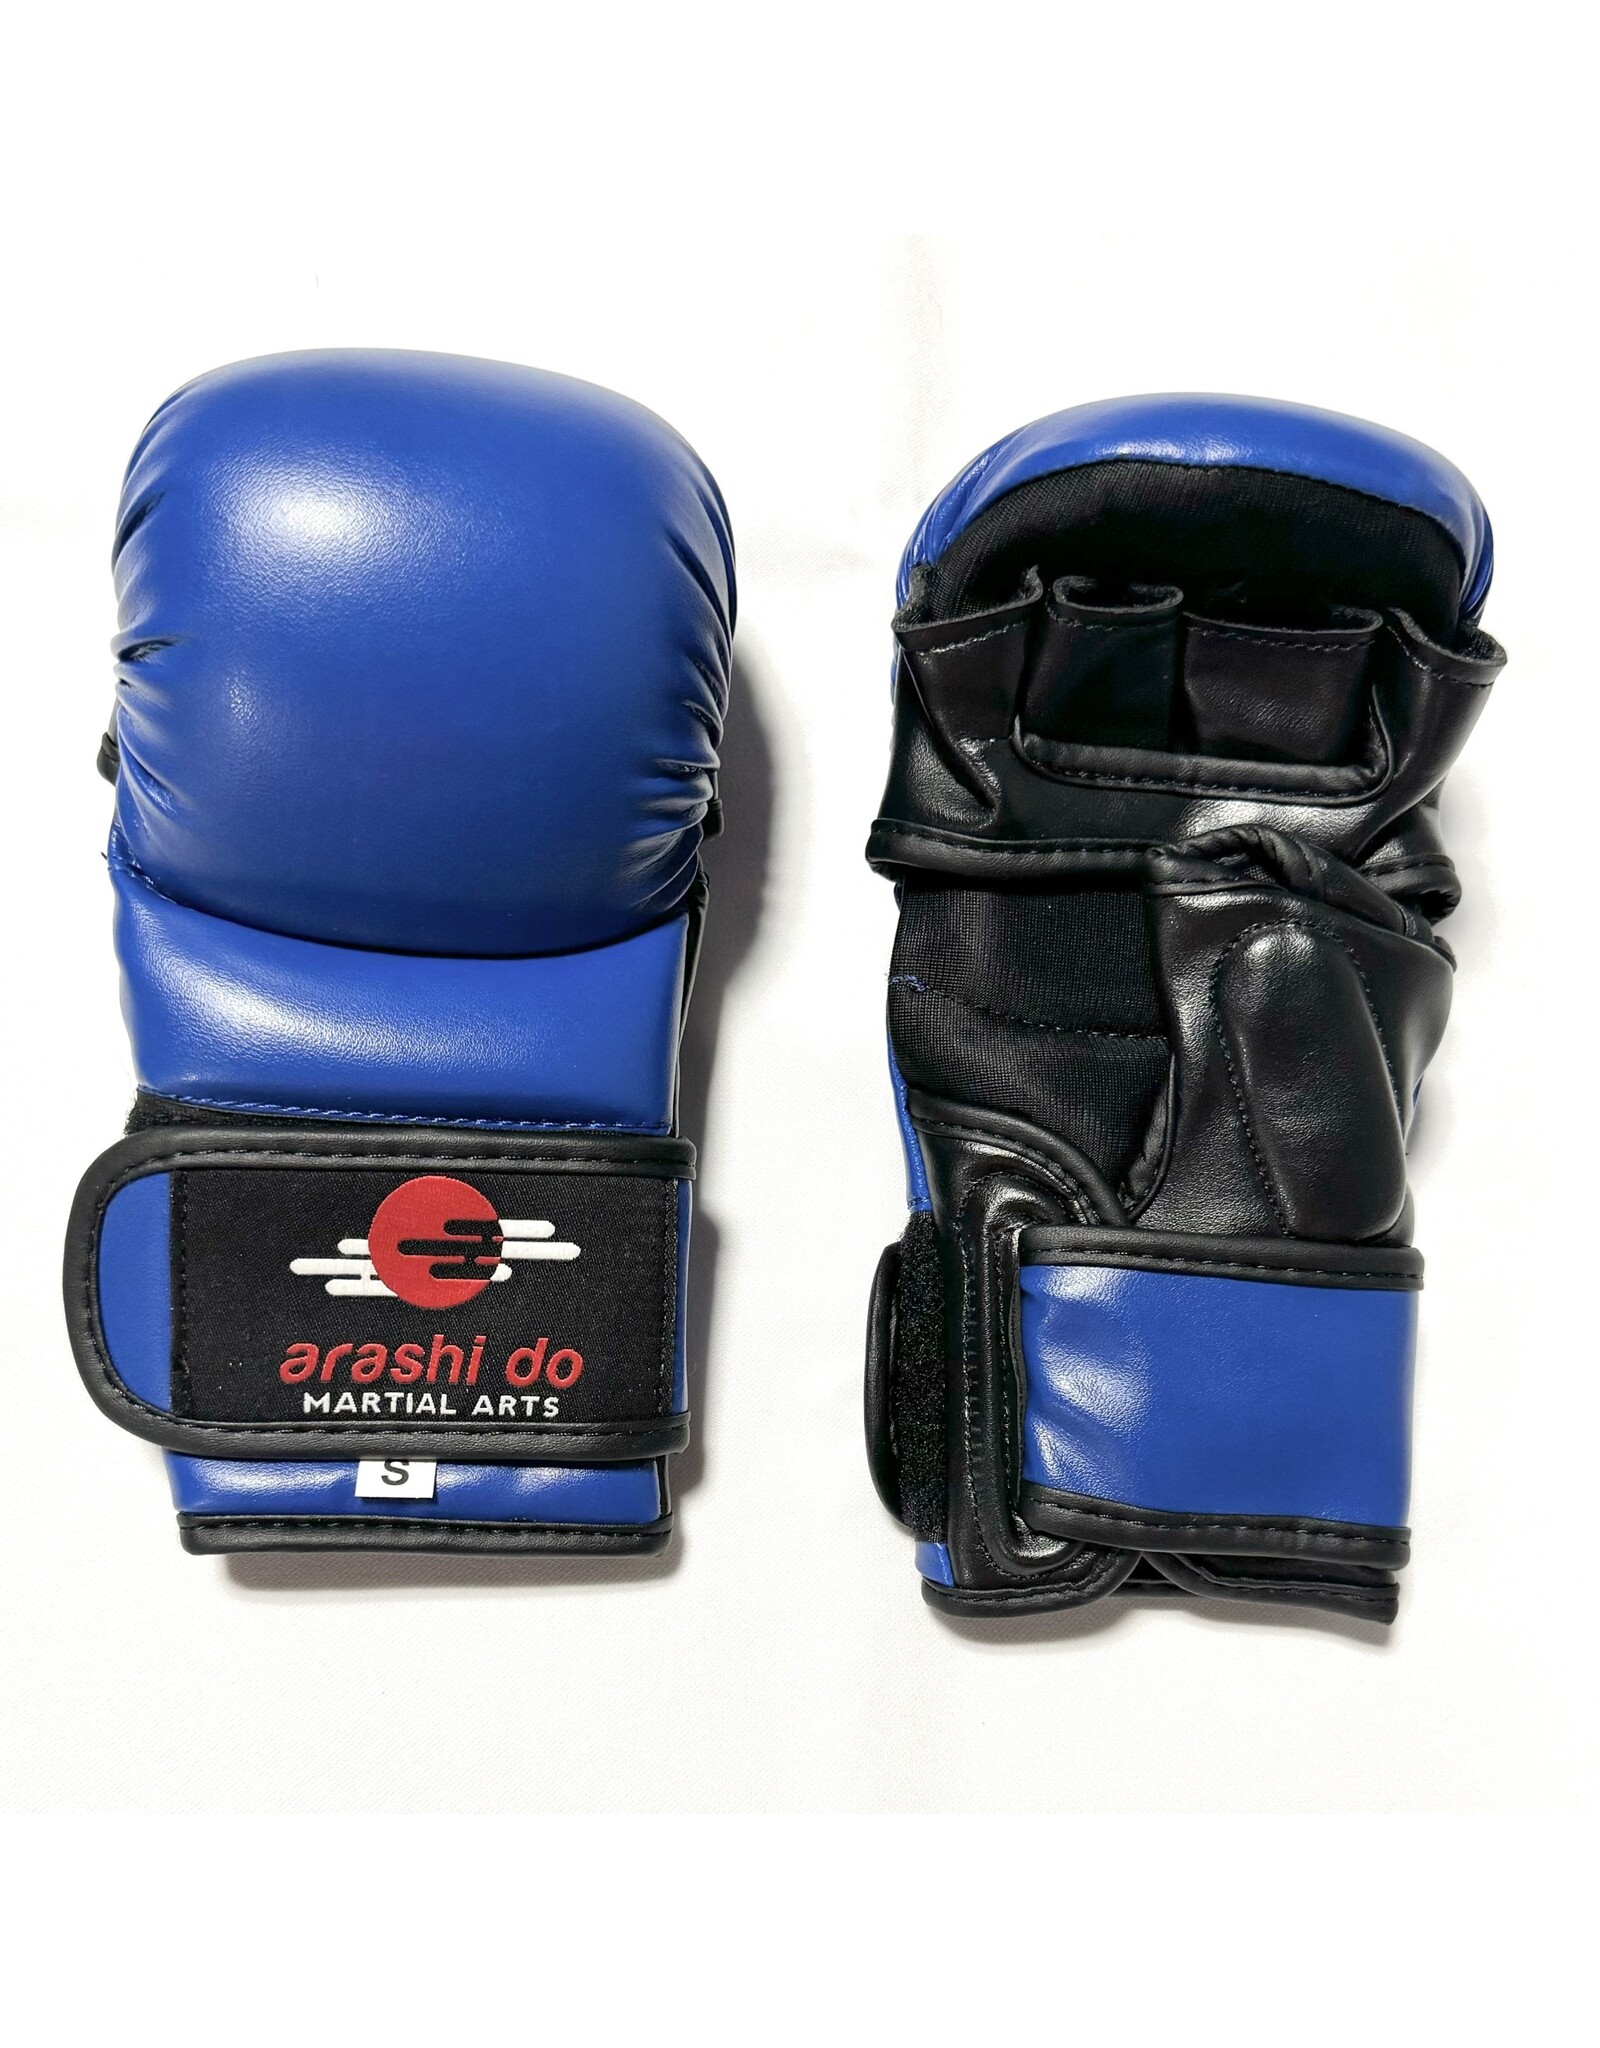 ADMA Leather Sparring Gloves